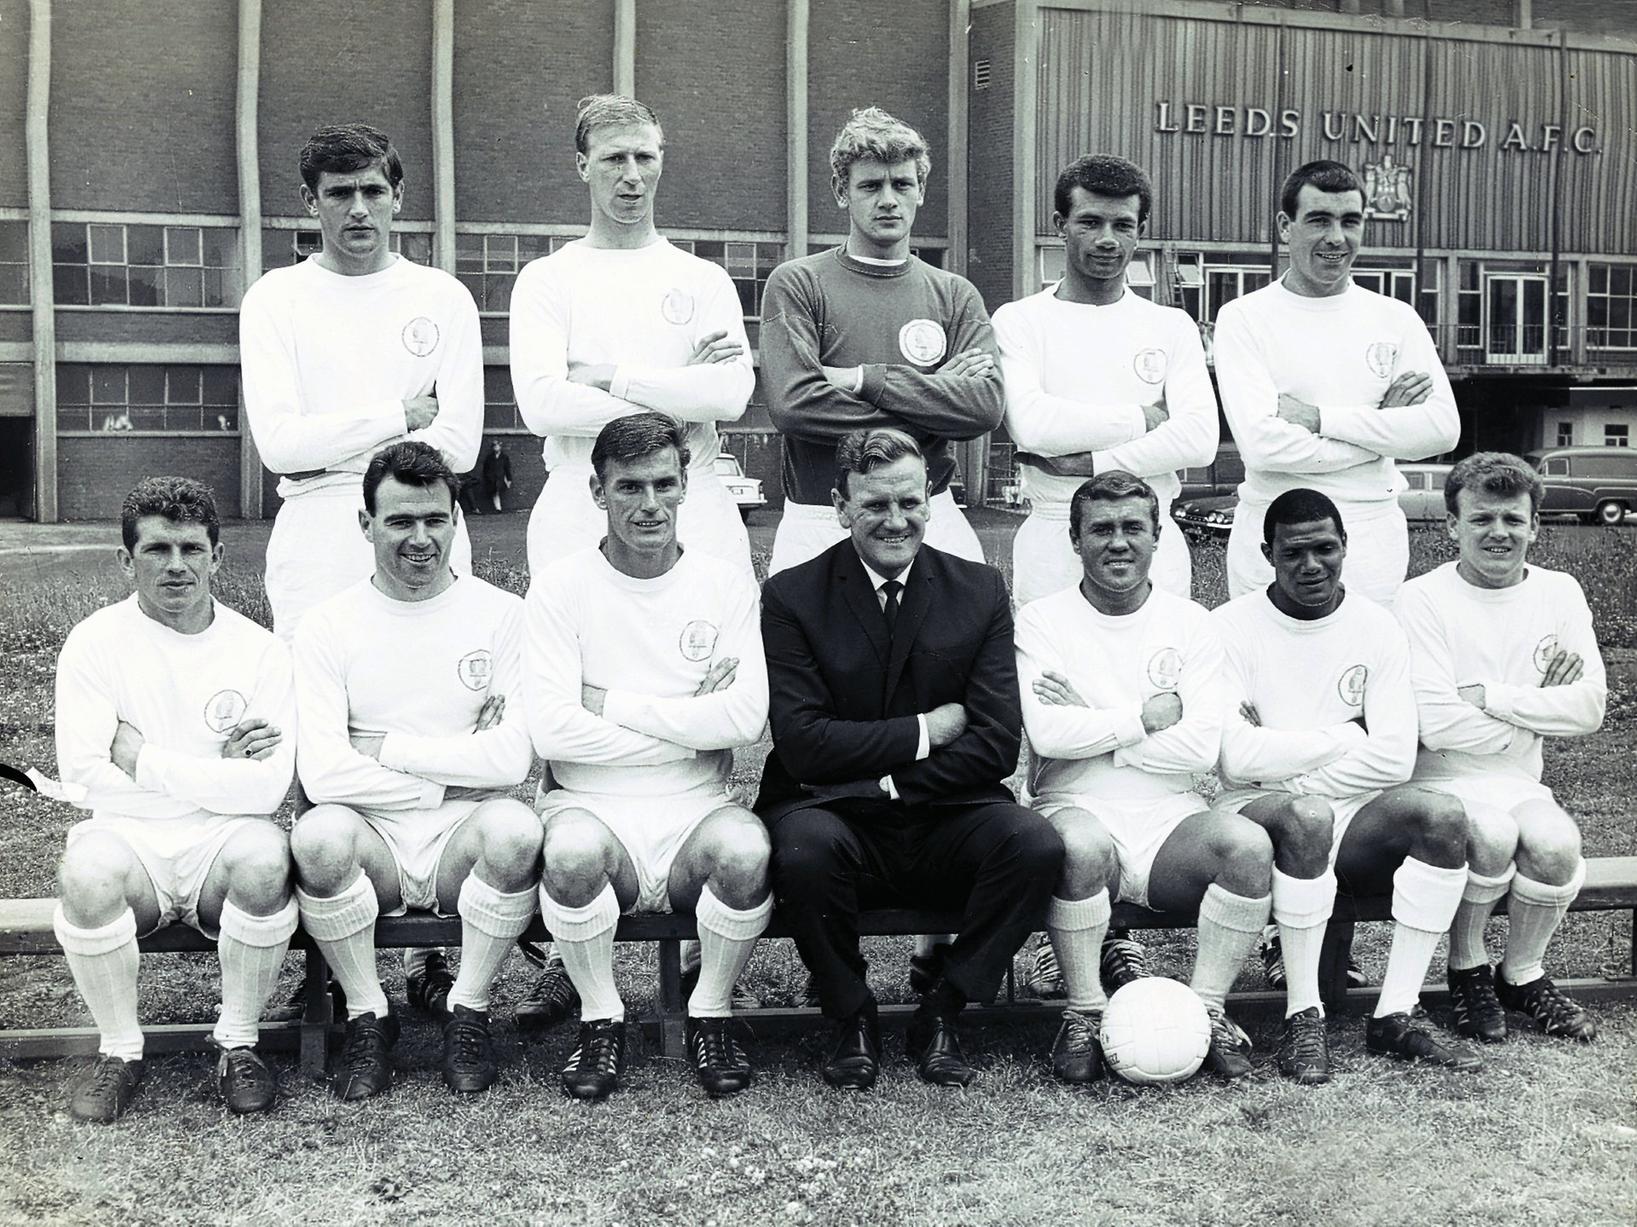 Storrie, pictured front row second from left, was signed by Revie as a proven goalscorer in 1962. Scored on his debut and helped Leeds win promotion to the First Division in the 196364 season.